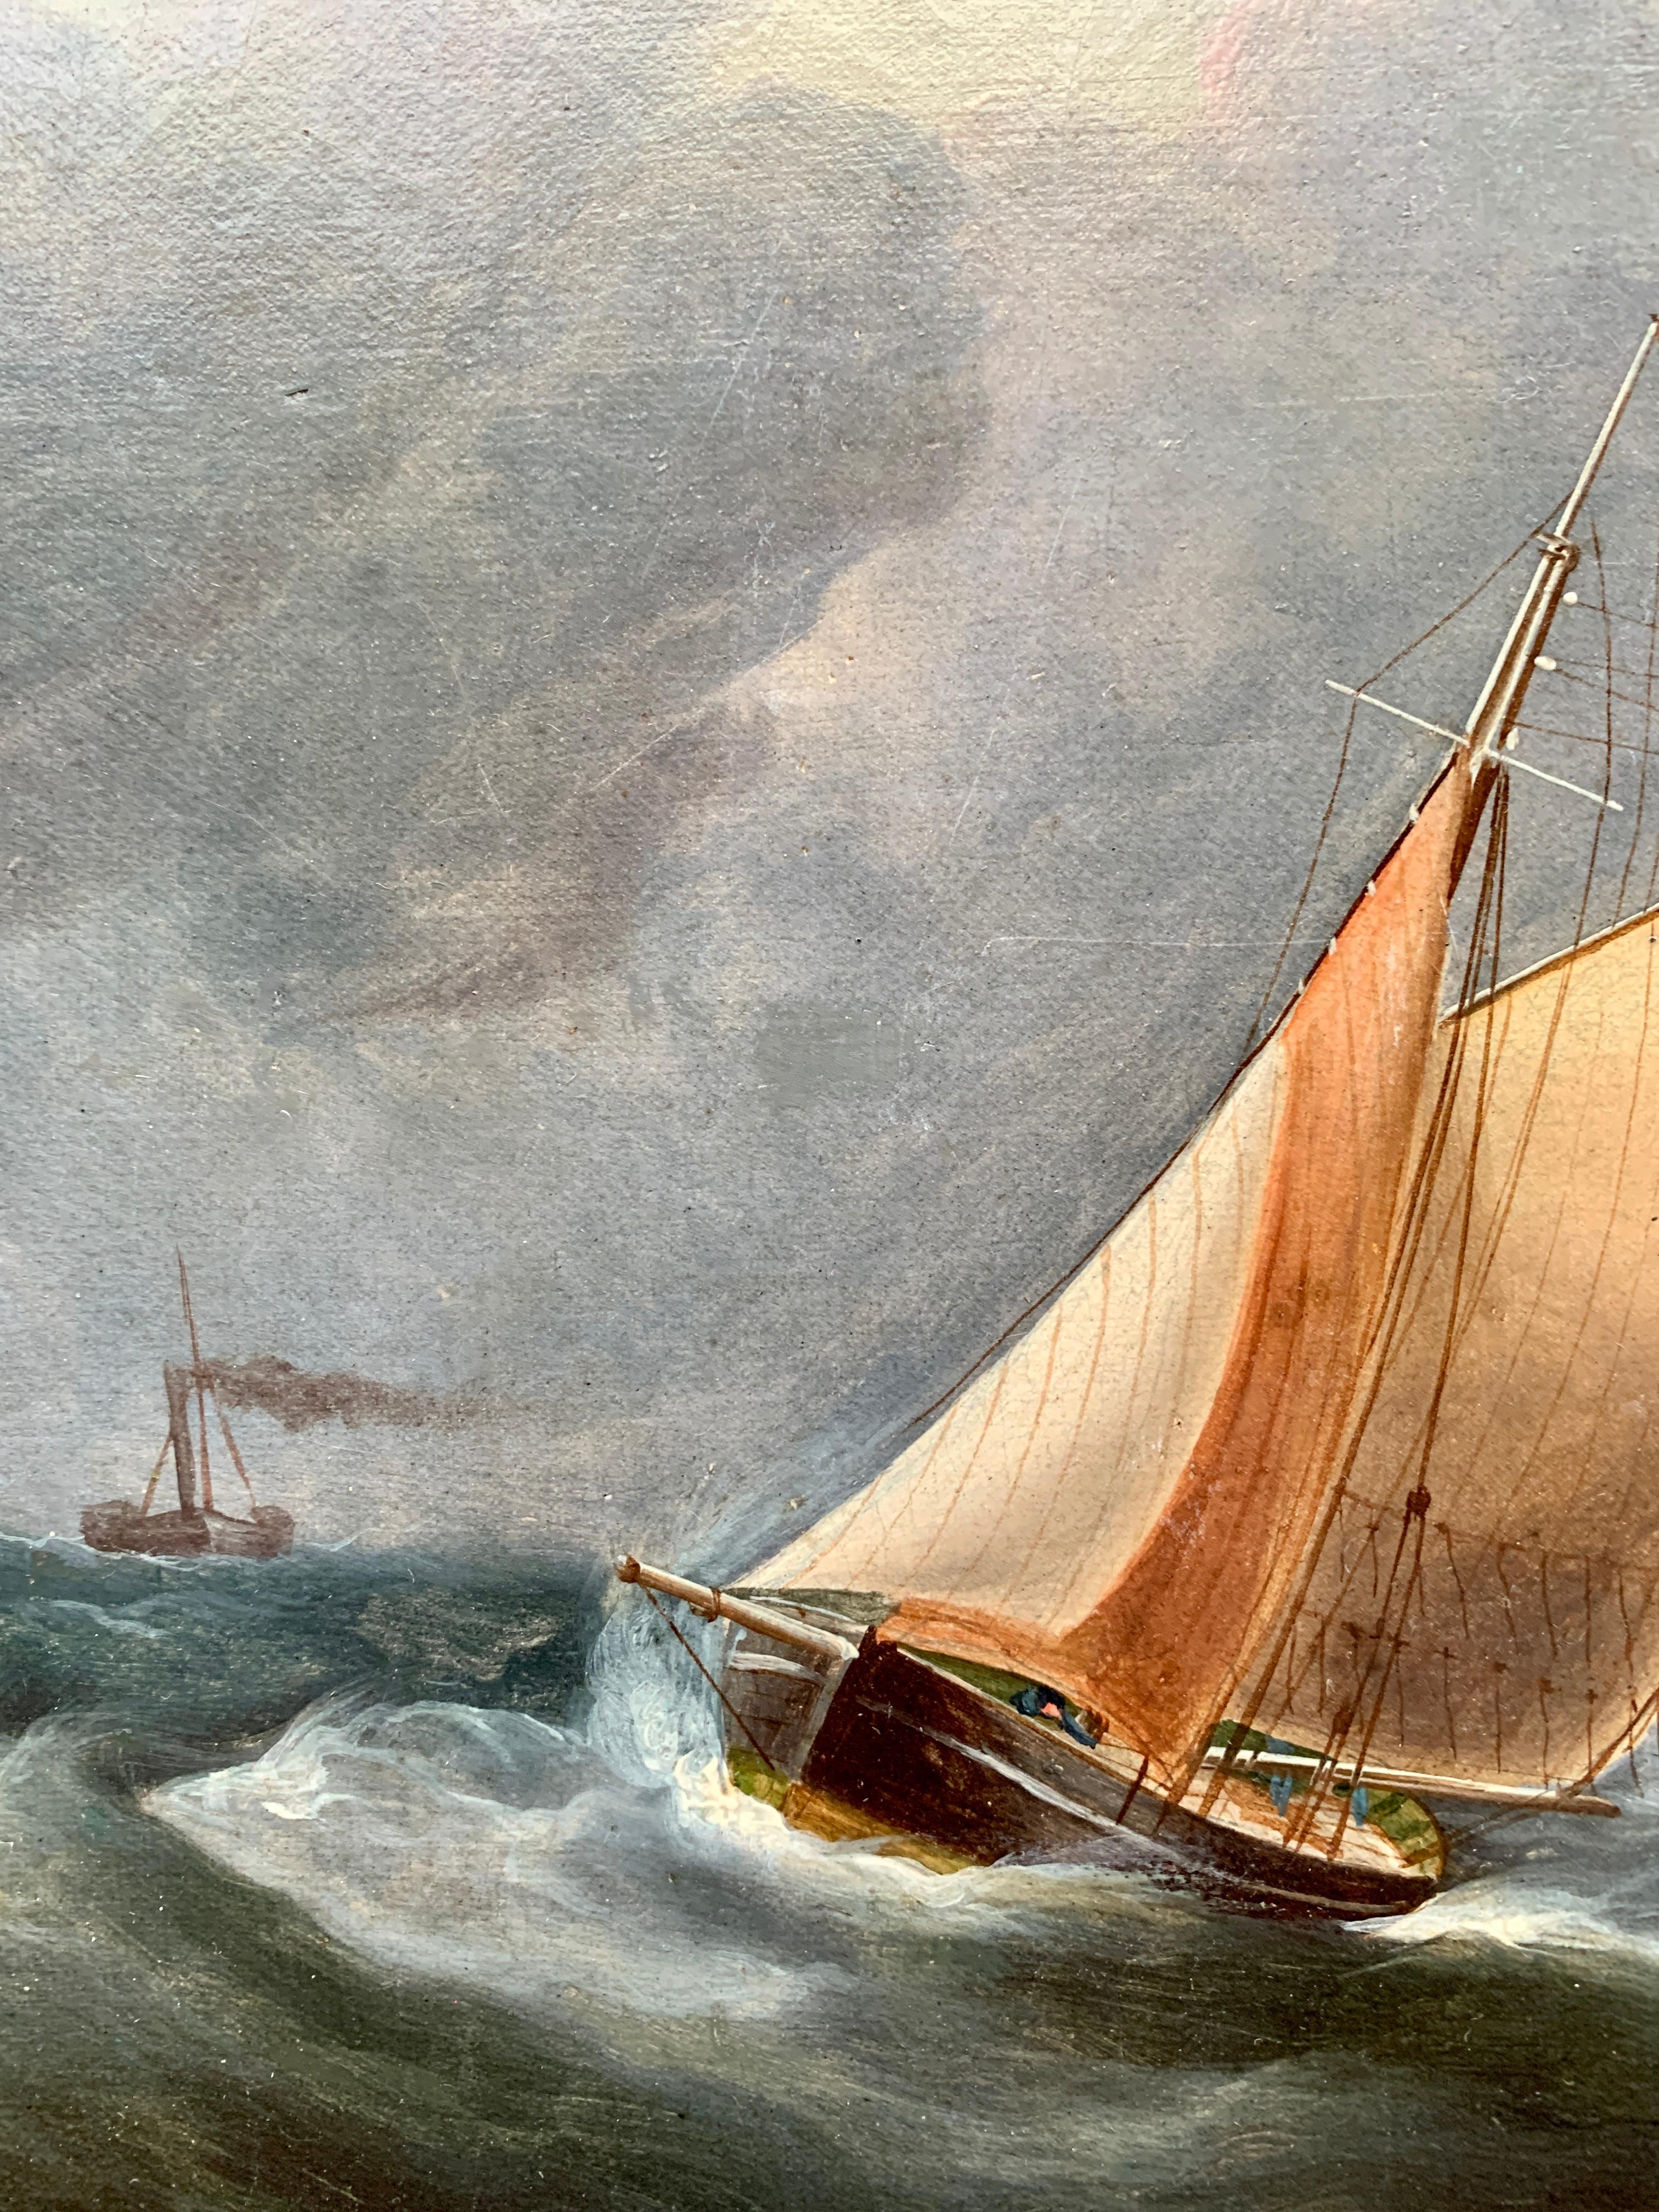 Antique 19th century English Yacht and Warship at sea off the English coast - Brown Figurative Painting by R.B.Spencer